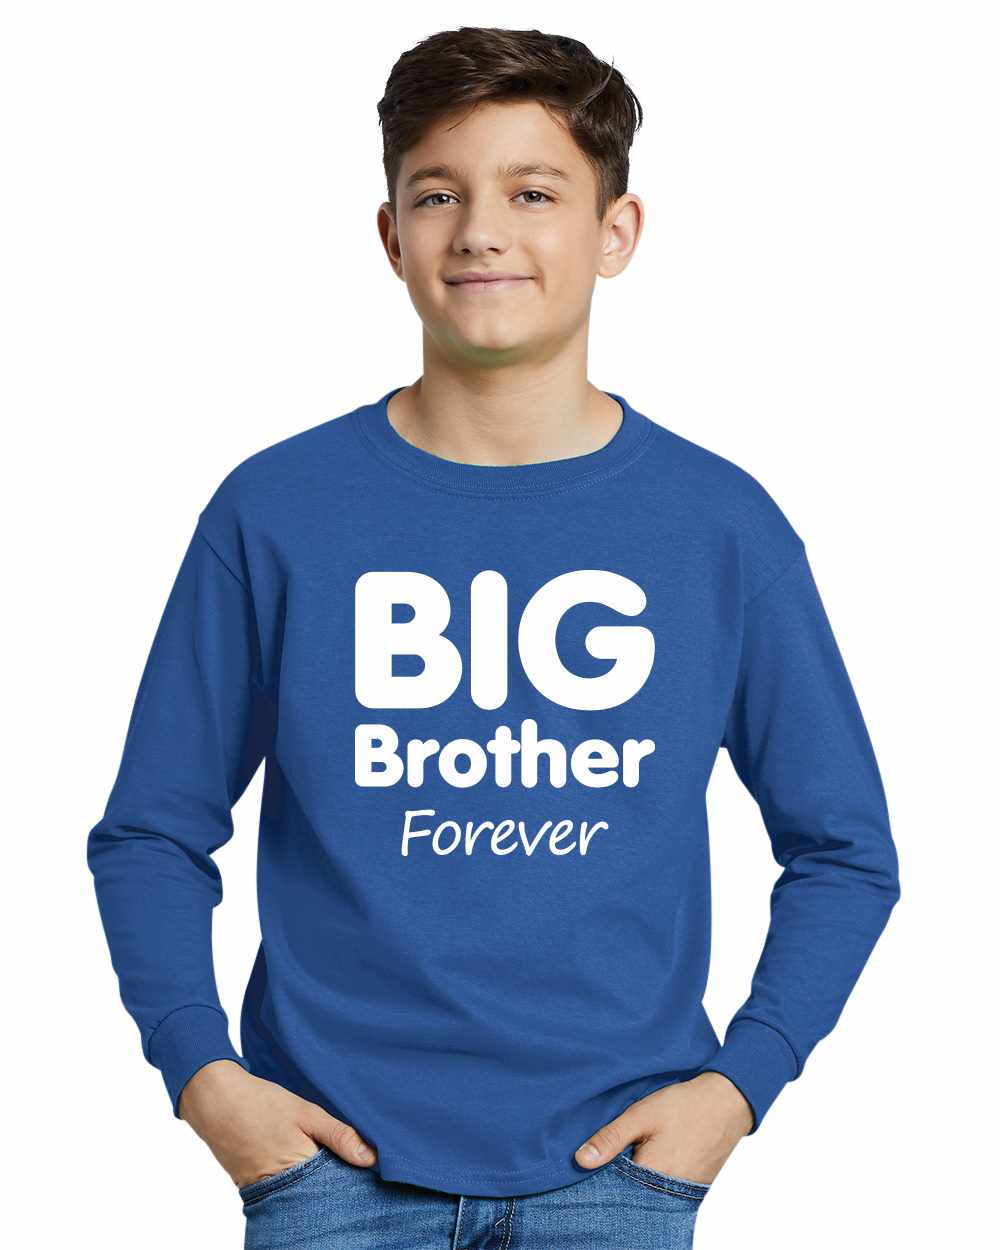 Big Brother Forever on Youth Long Sleeve Shirt (#952-203)